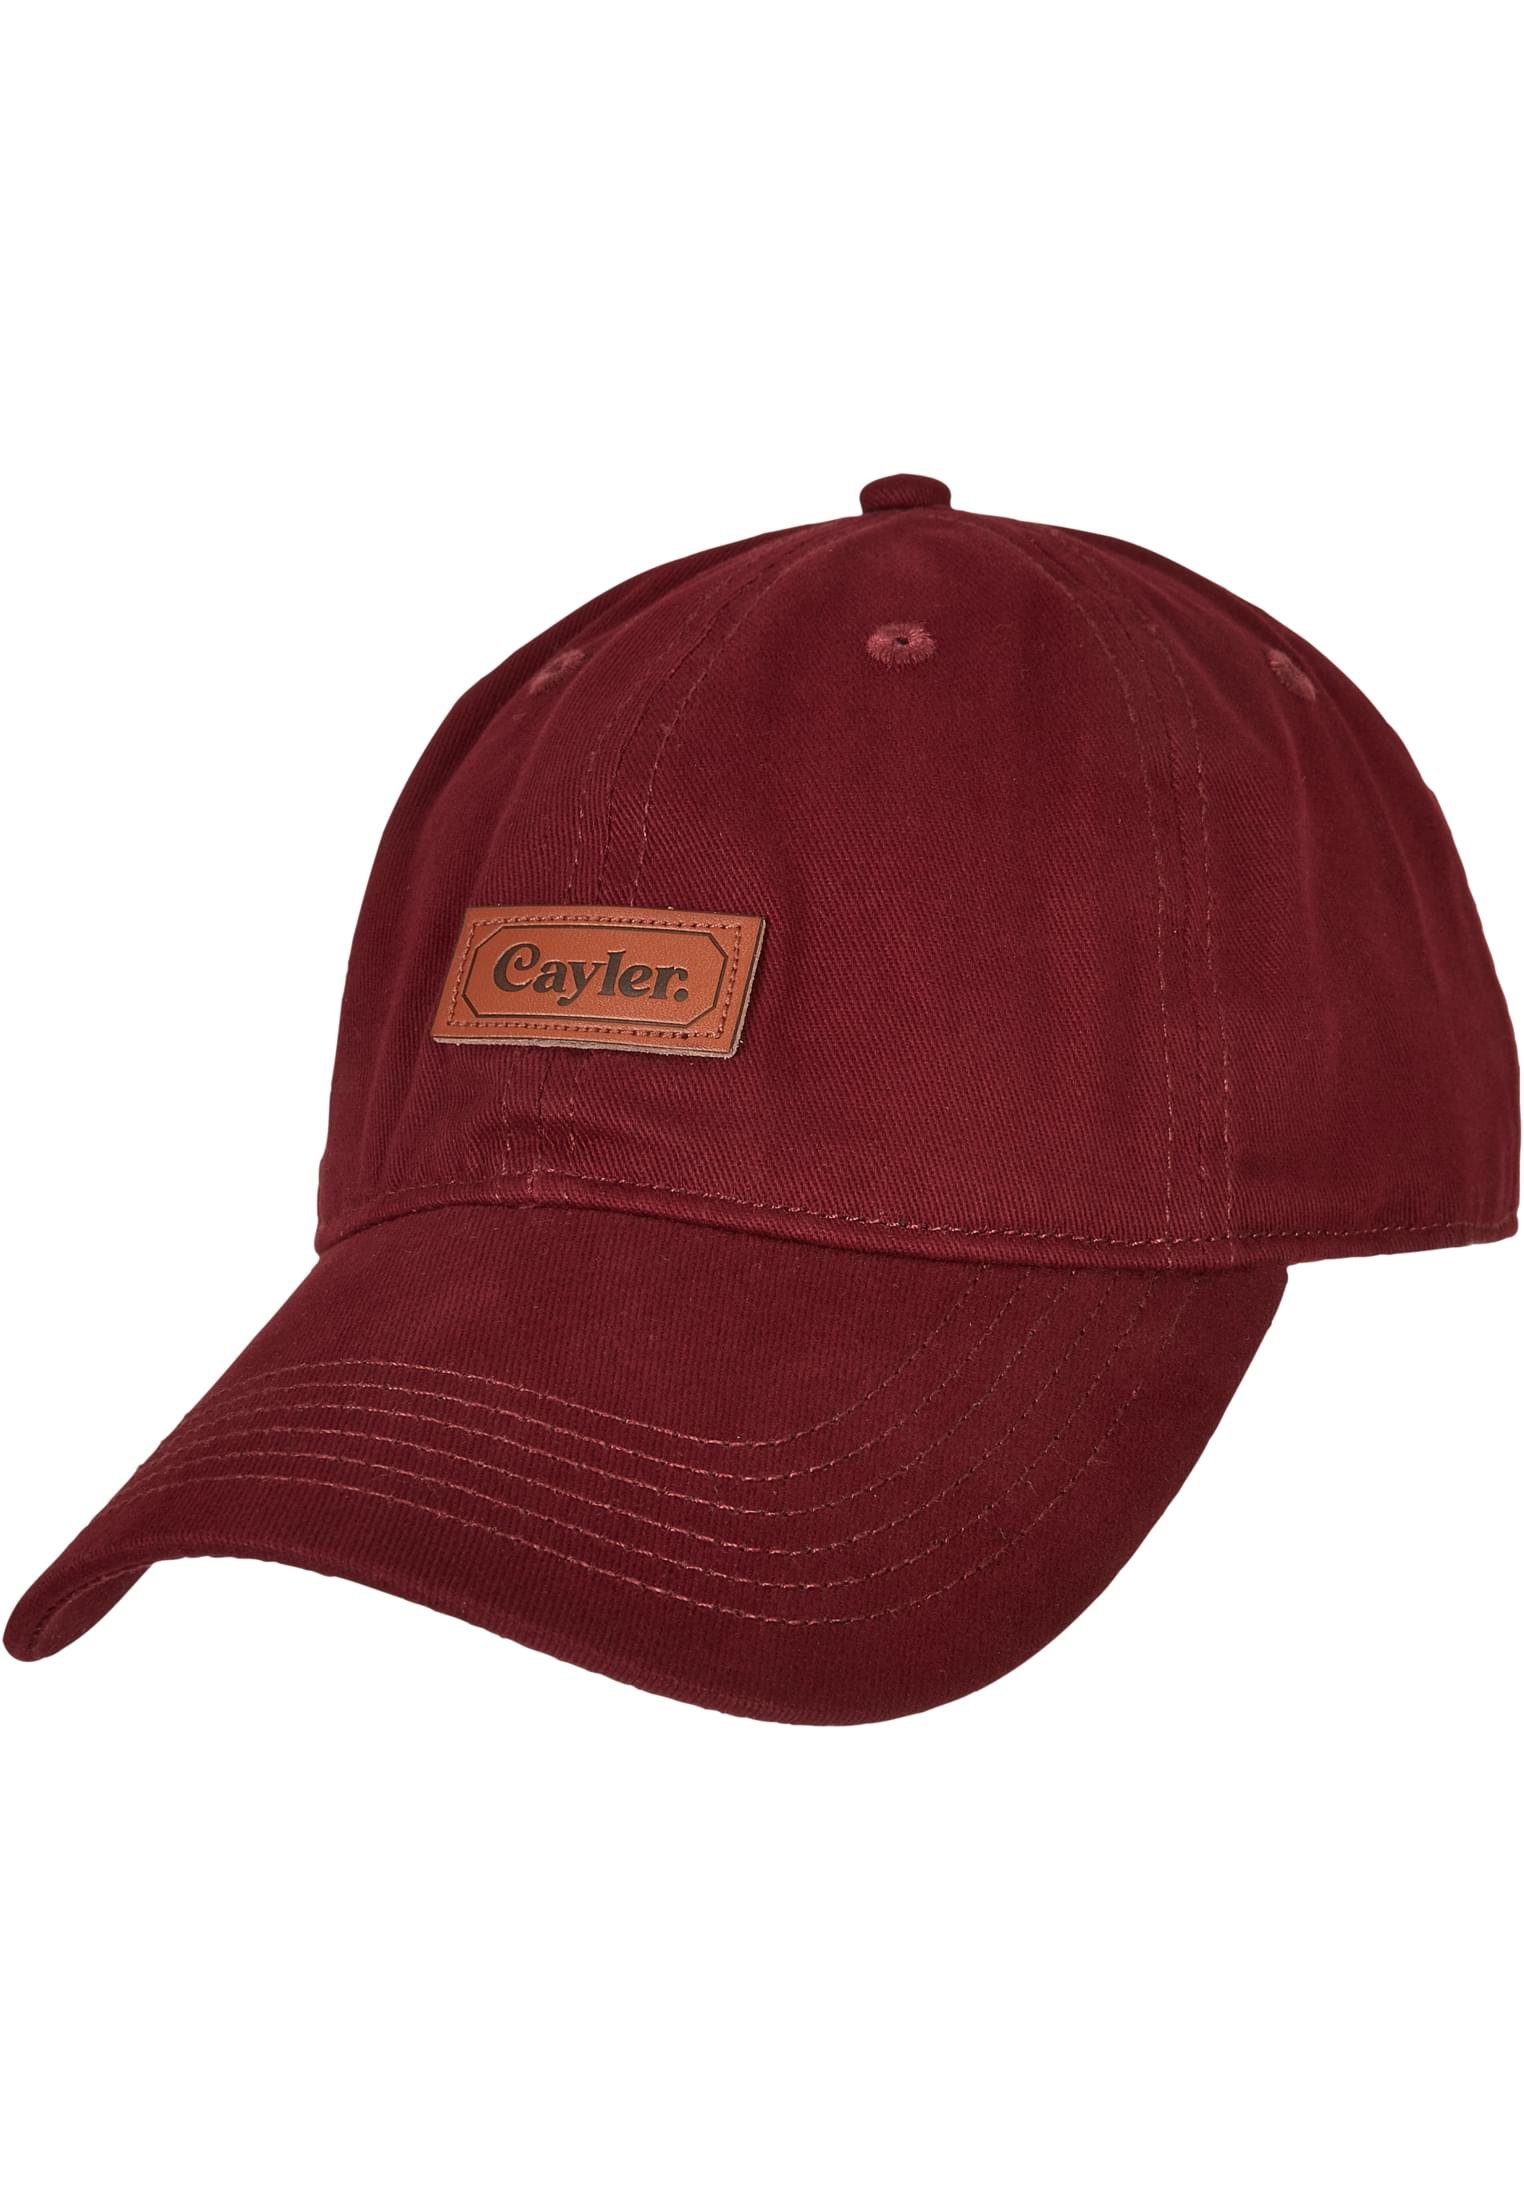 Classy Patch Curved Cap bordeaux one size